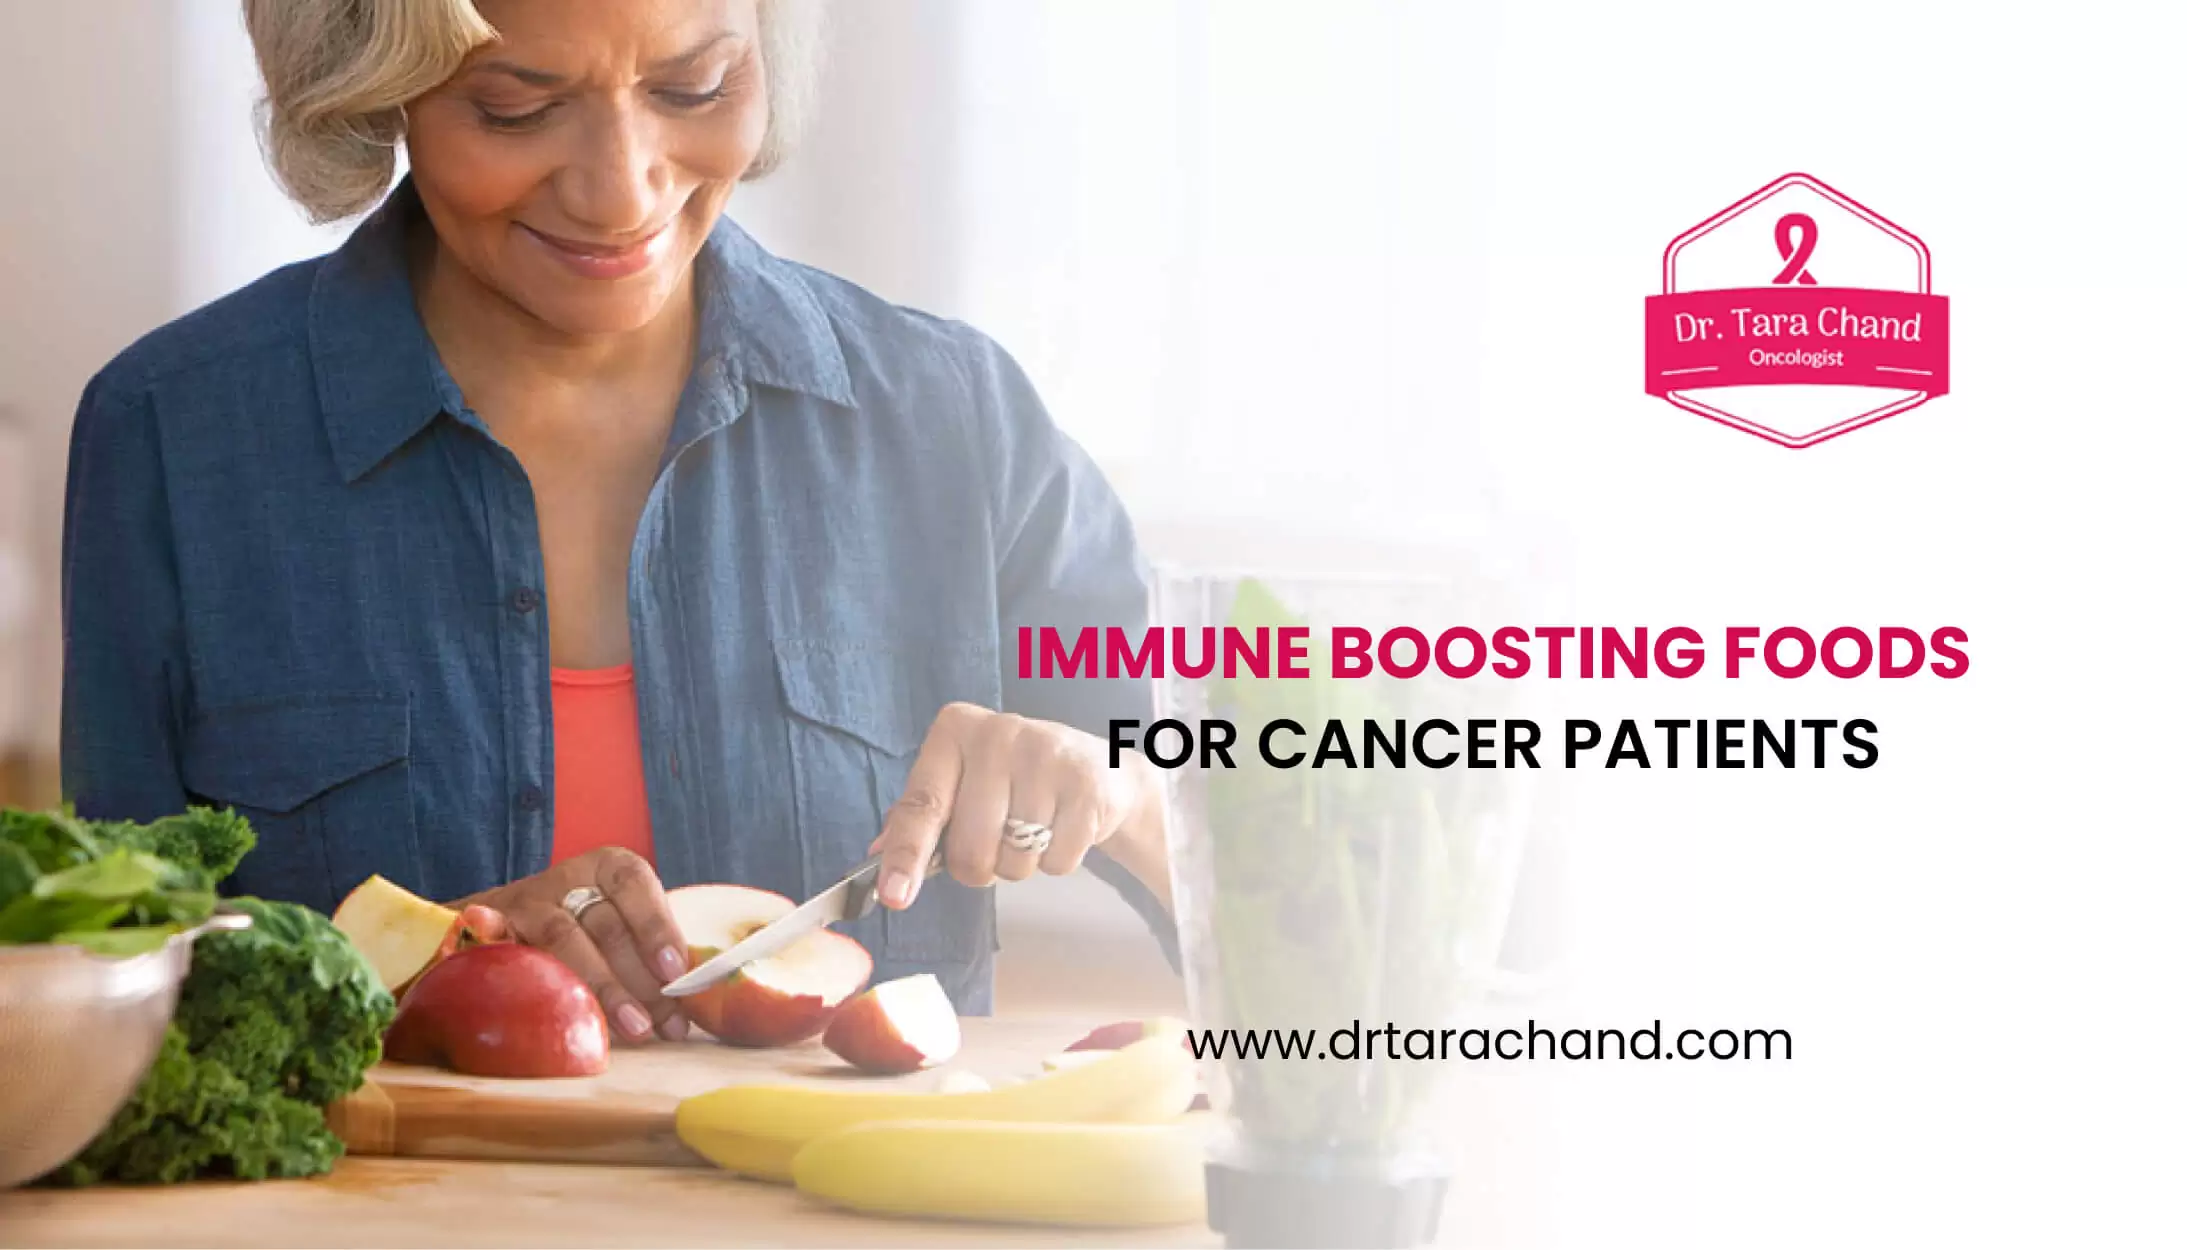 Immune boosting foods for cancer patients!